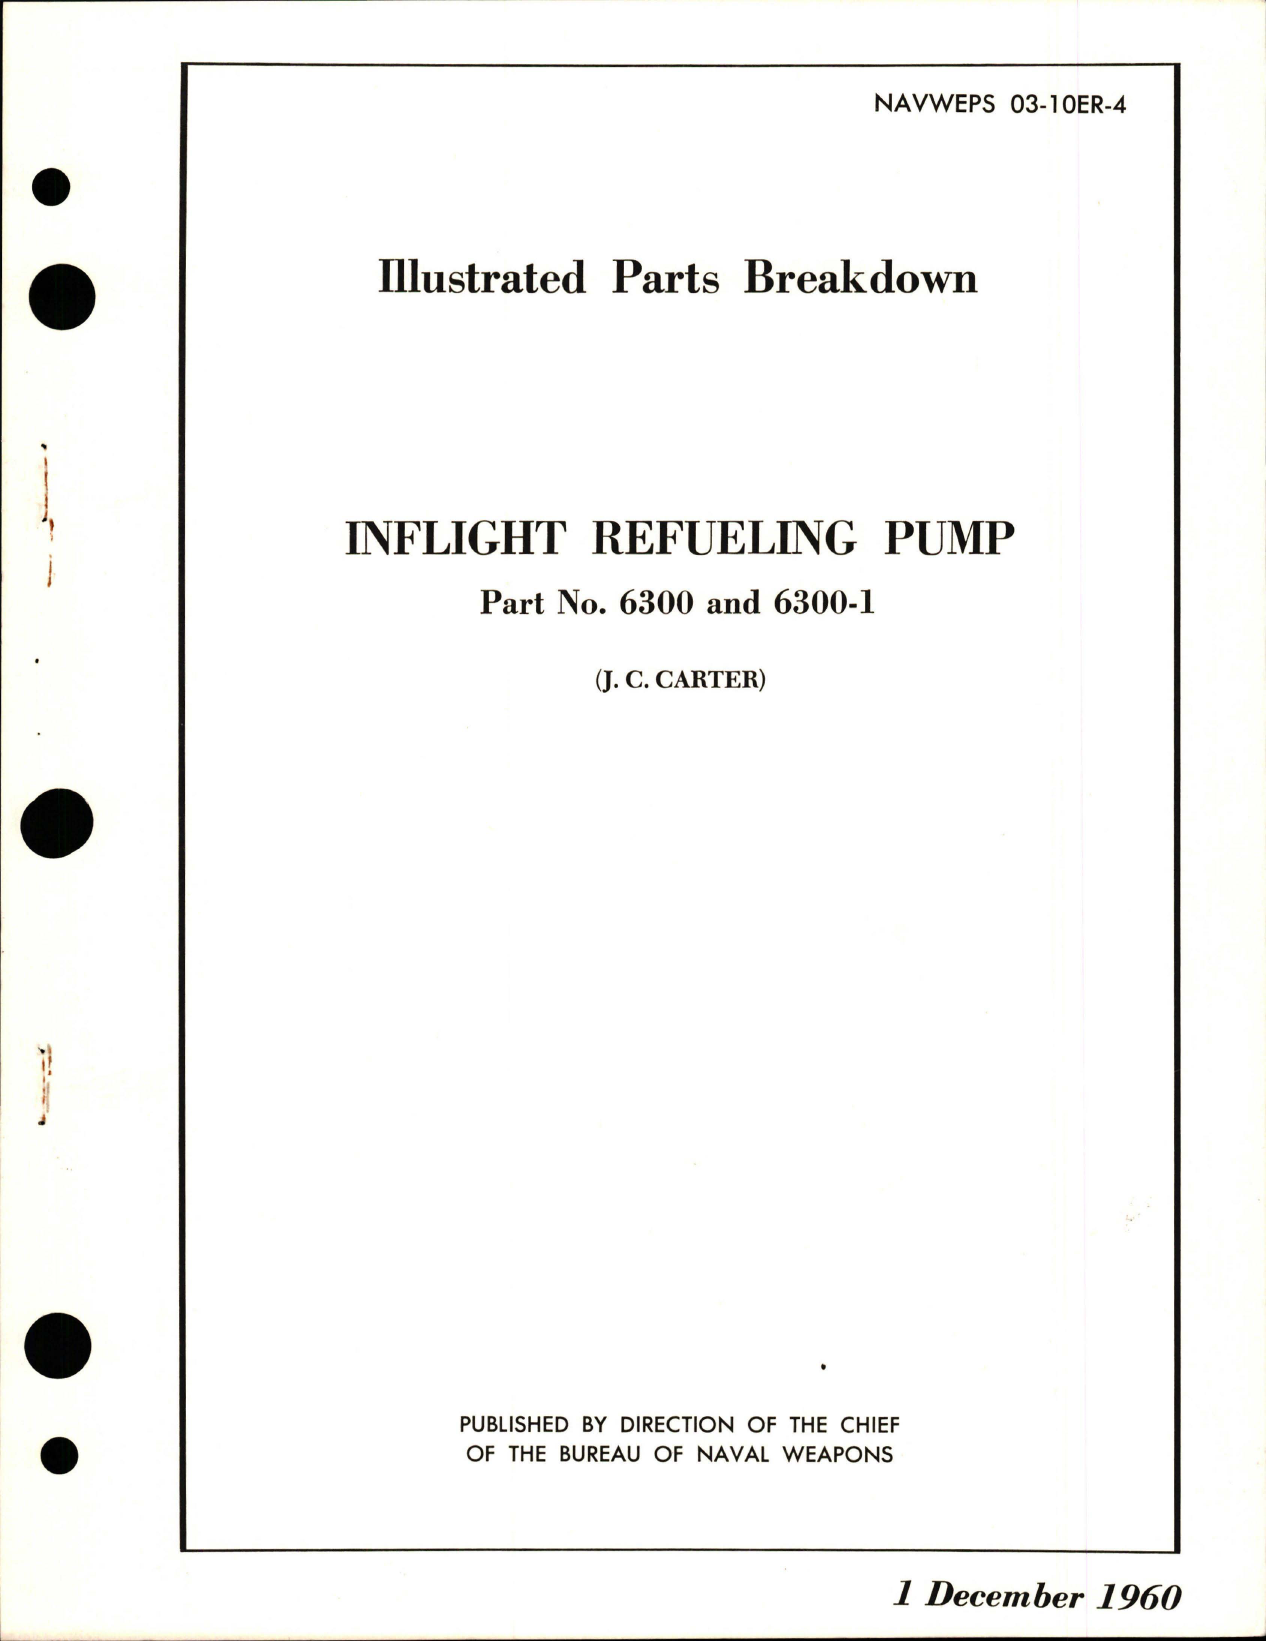 Sample page 1 from AirCorps Library document: Illustrated Parts Breakdown for Inflight Refueling Pump - Part 6300 and 6300-1